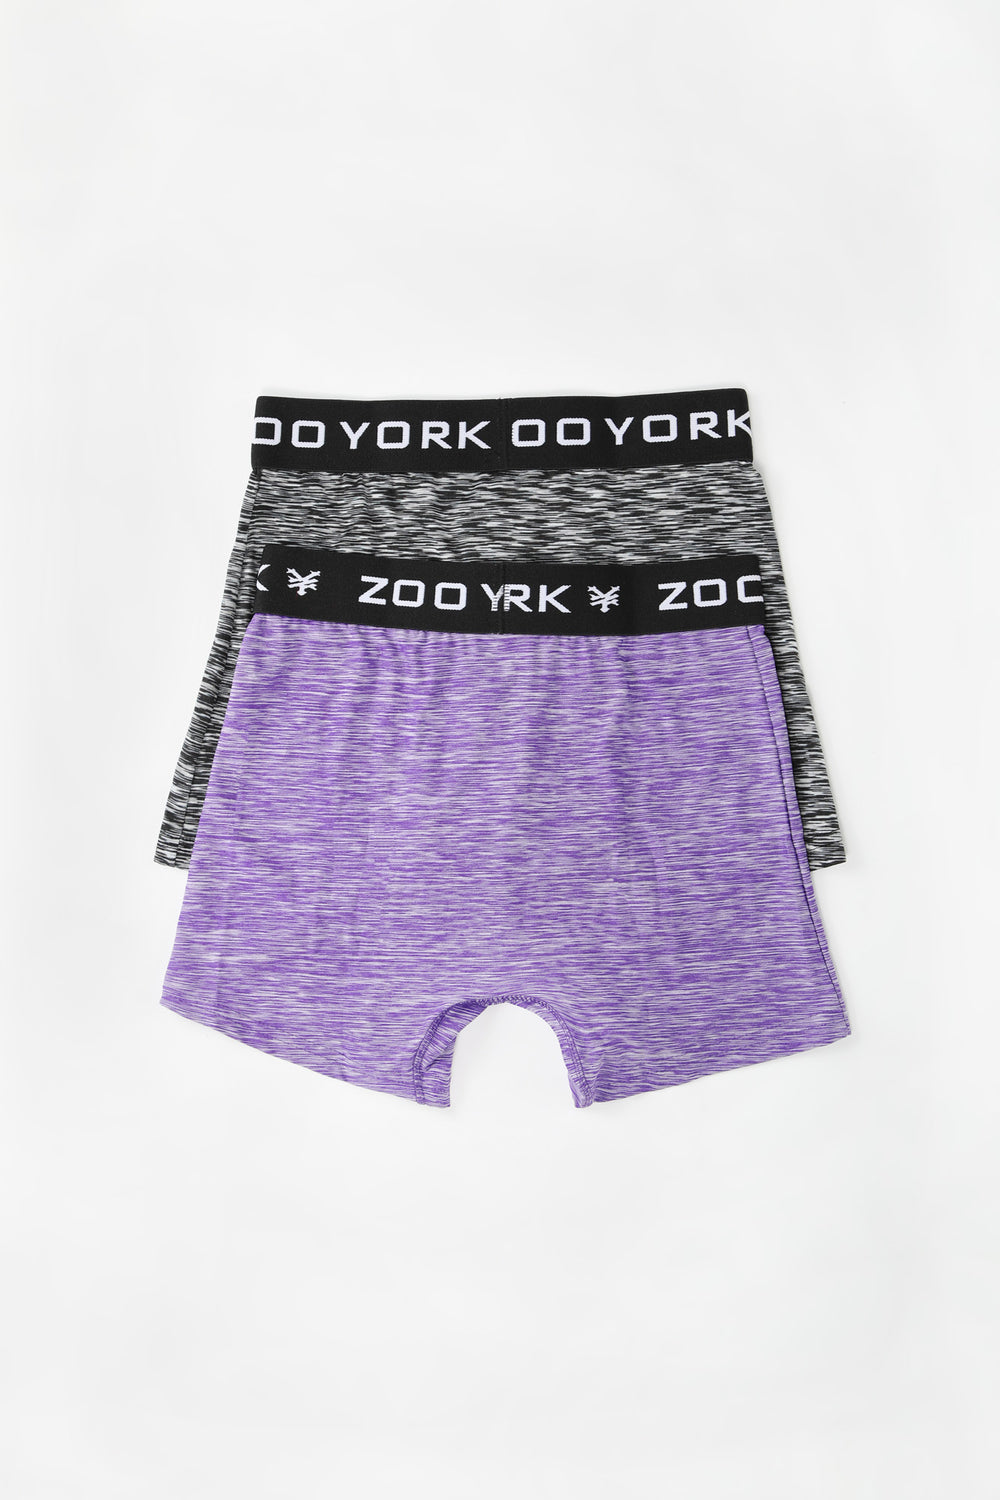 Zoo York Youth Space Dye Boxer Briefs 2-Pack Zoo York Youth Space Dye Boxer Briefs 2-Pack